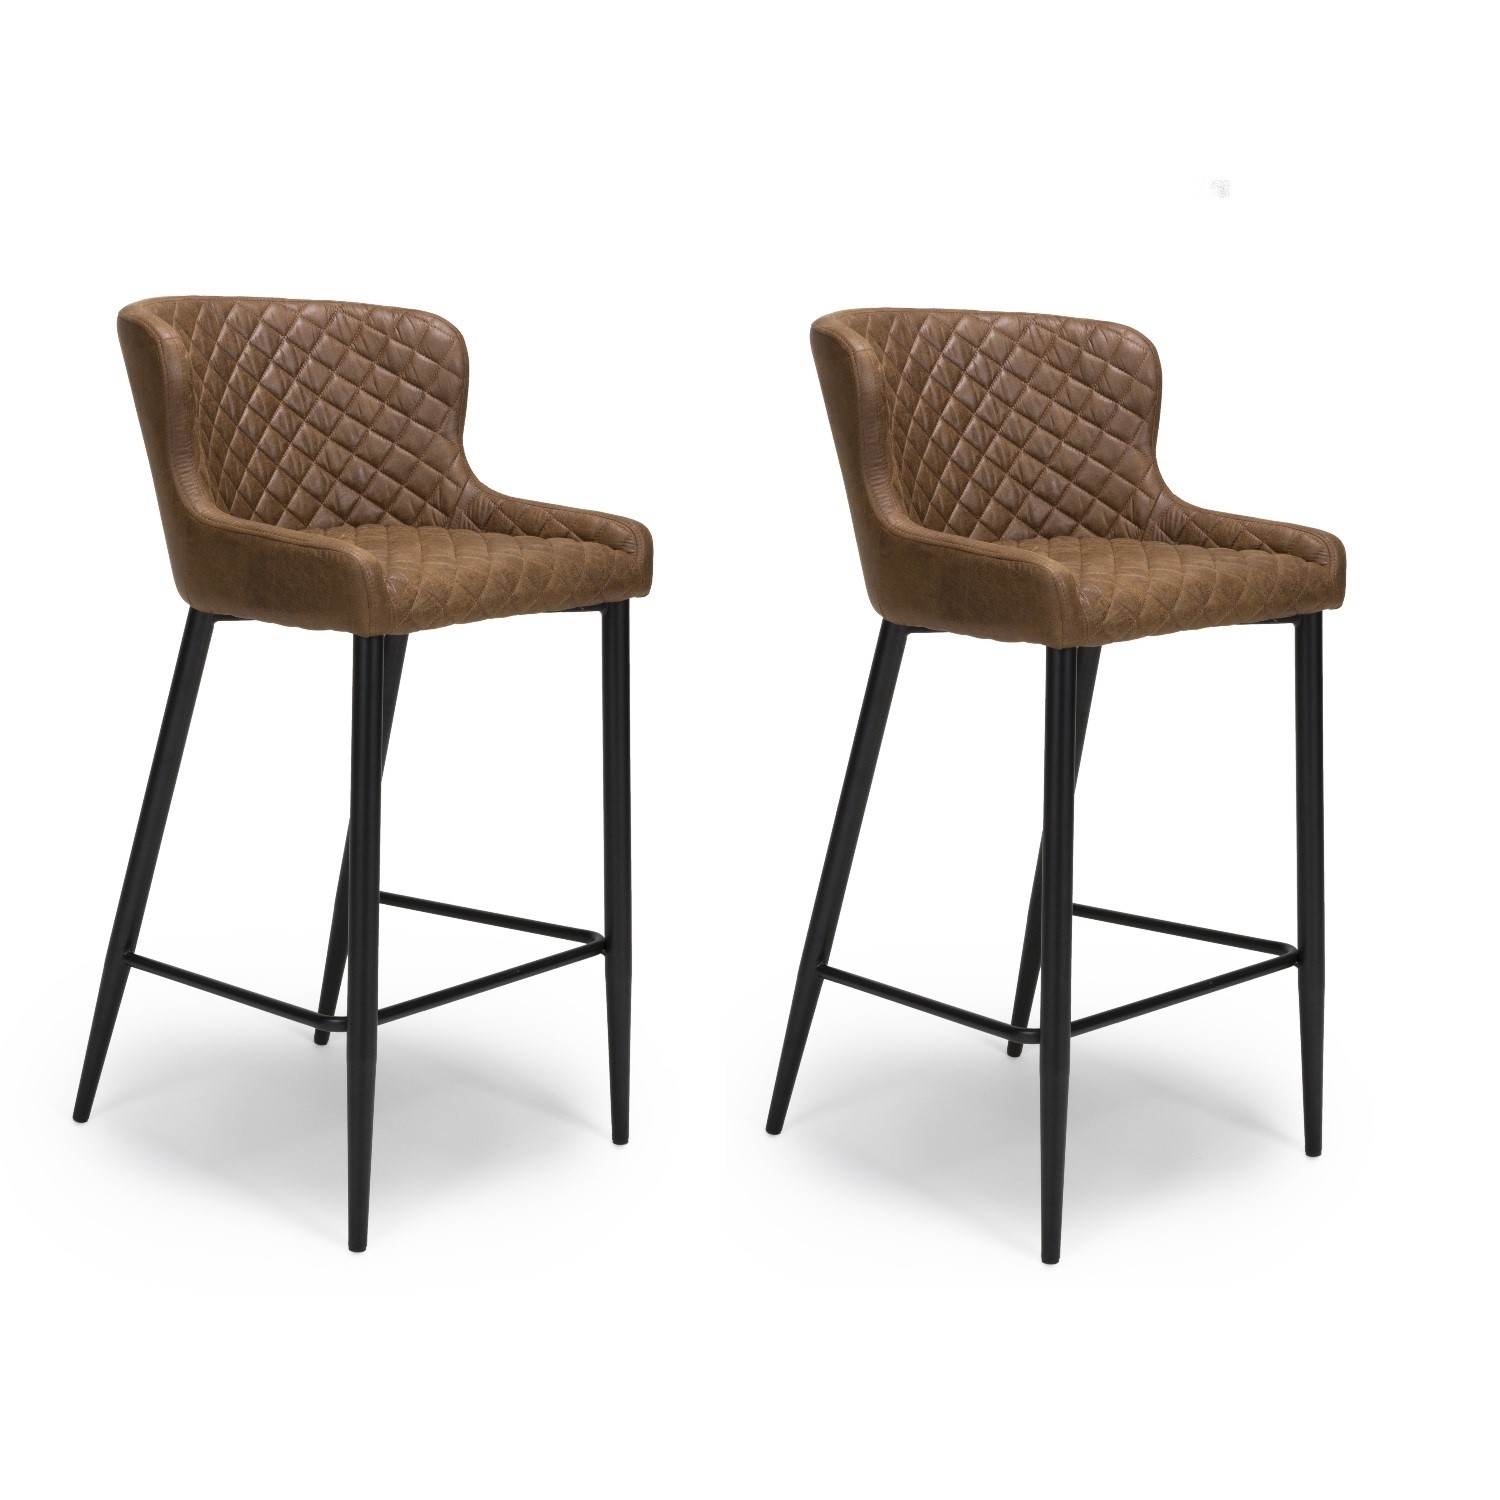 Photo of Set of 2 brown antique faux leather bar stools with backs - 72 cm